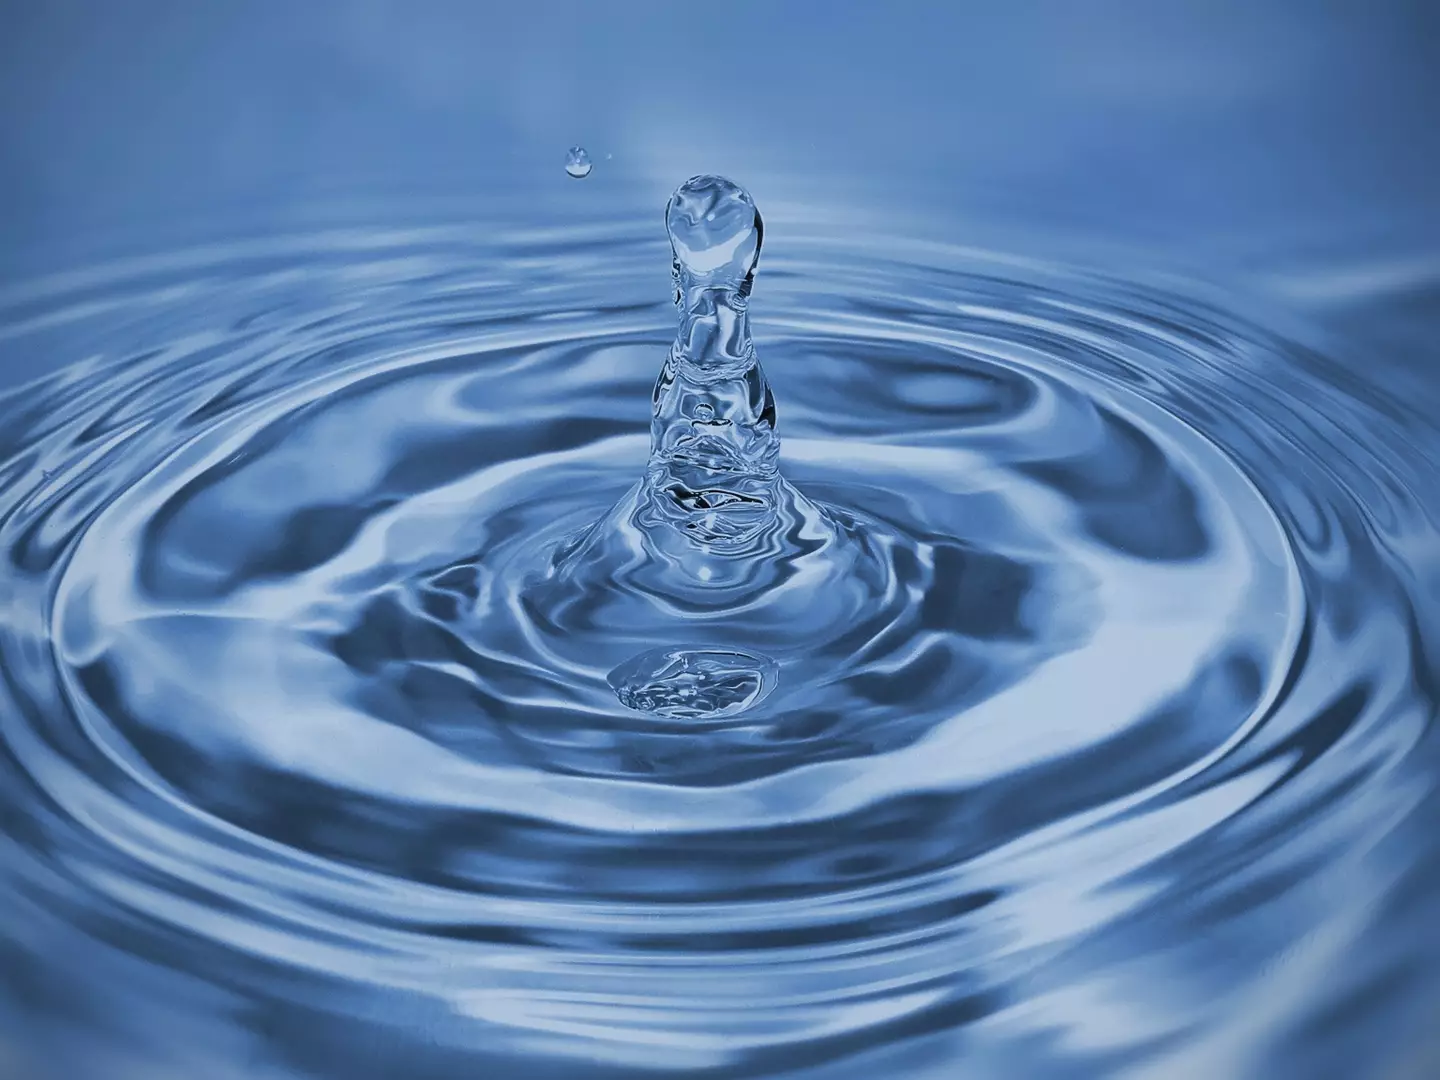 Having liquid water means that it's possible life as we know it could exist.